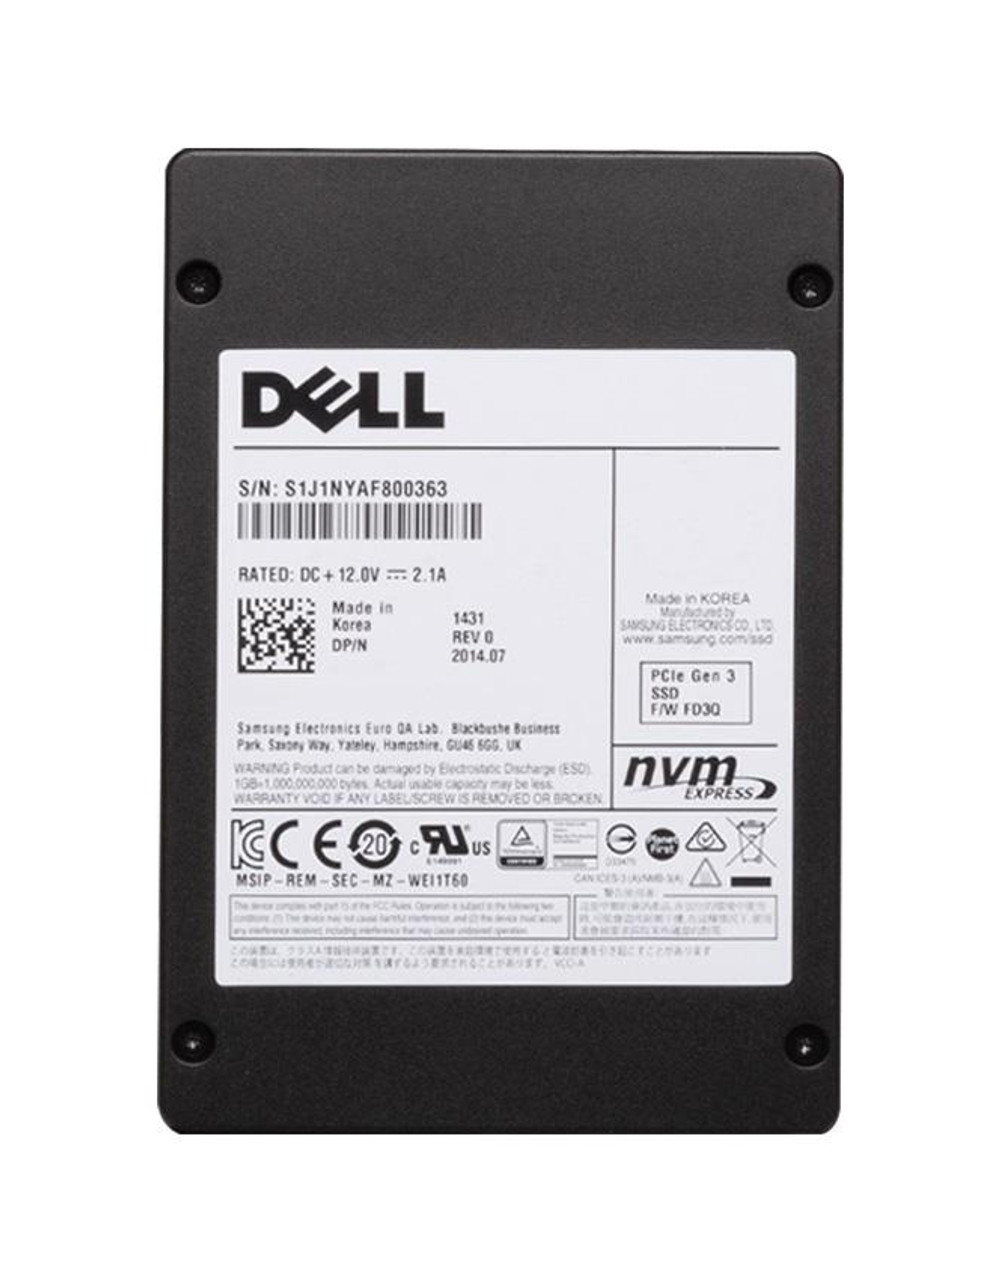 400-24365 Dell 175GB SLC PCI Express 2.0 x4 Hot Swap 2.5-inch Internal Solid State Drive (SSD)